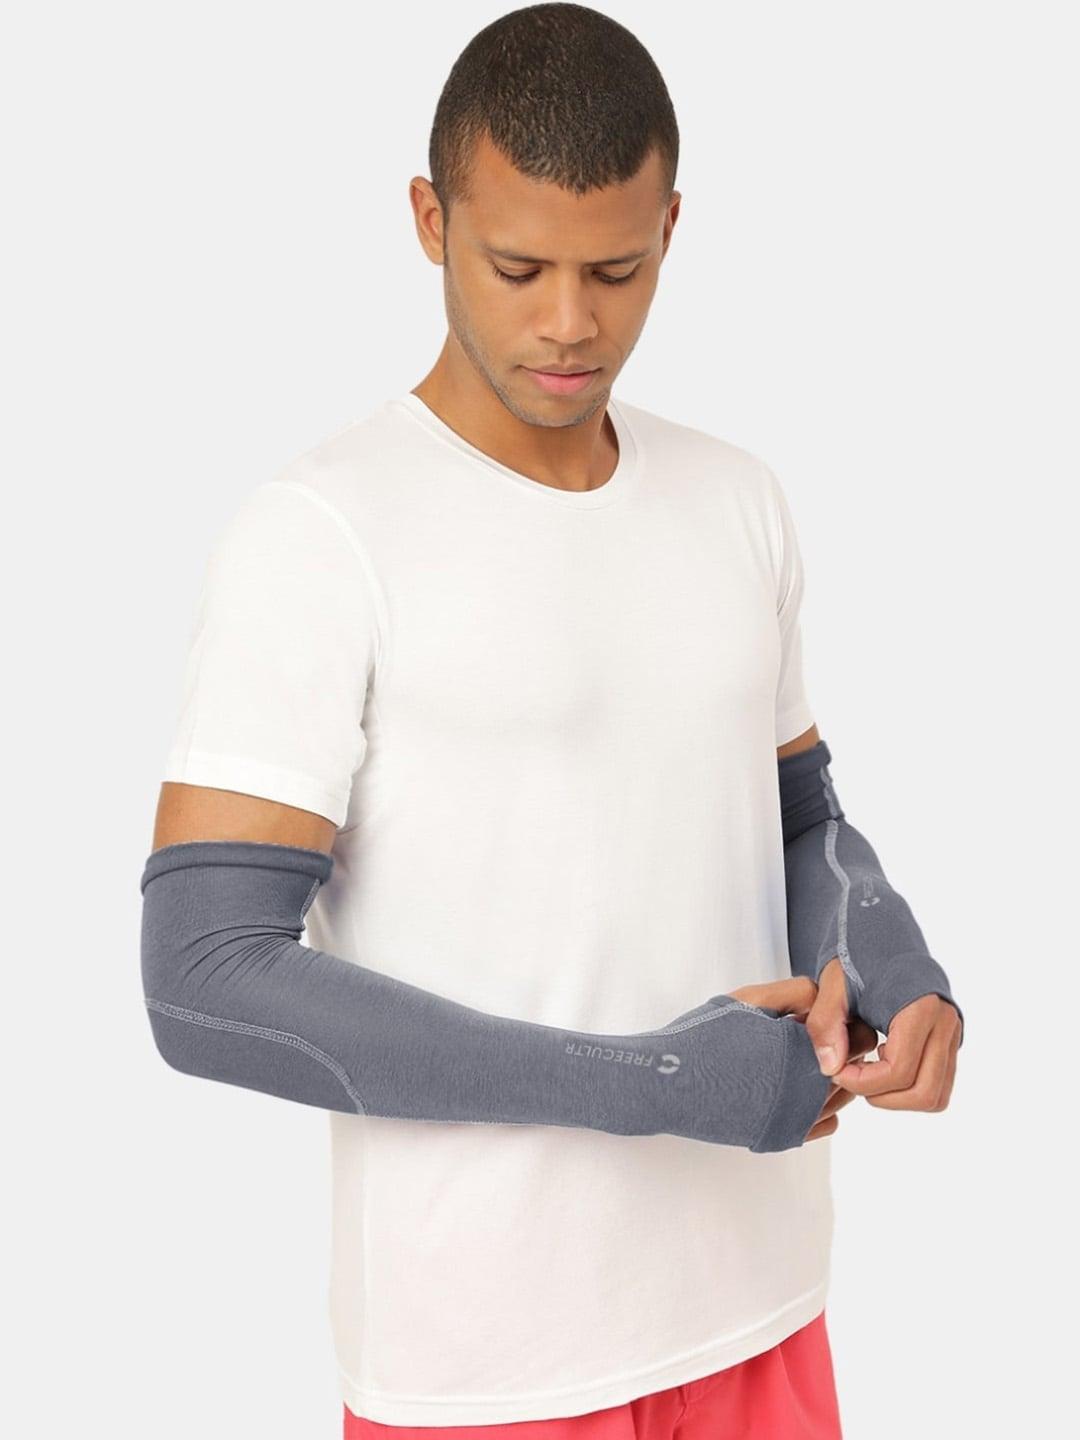 freecultr-breatheable-bamboo-cotton-antibacterial-arm-sleeves-gloves